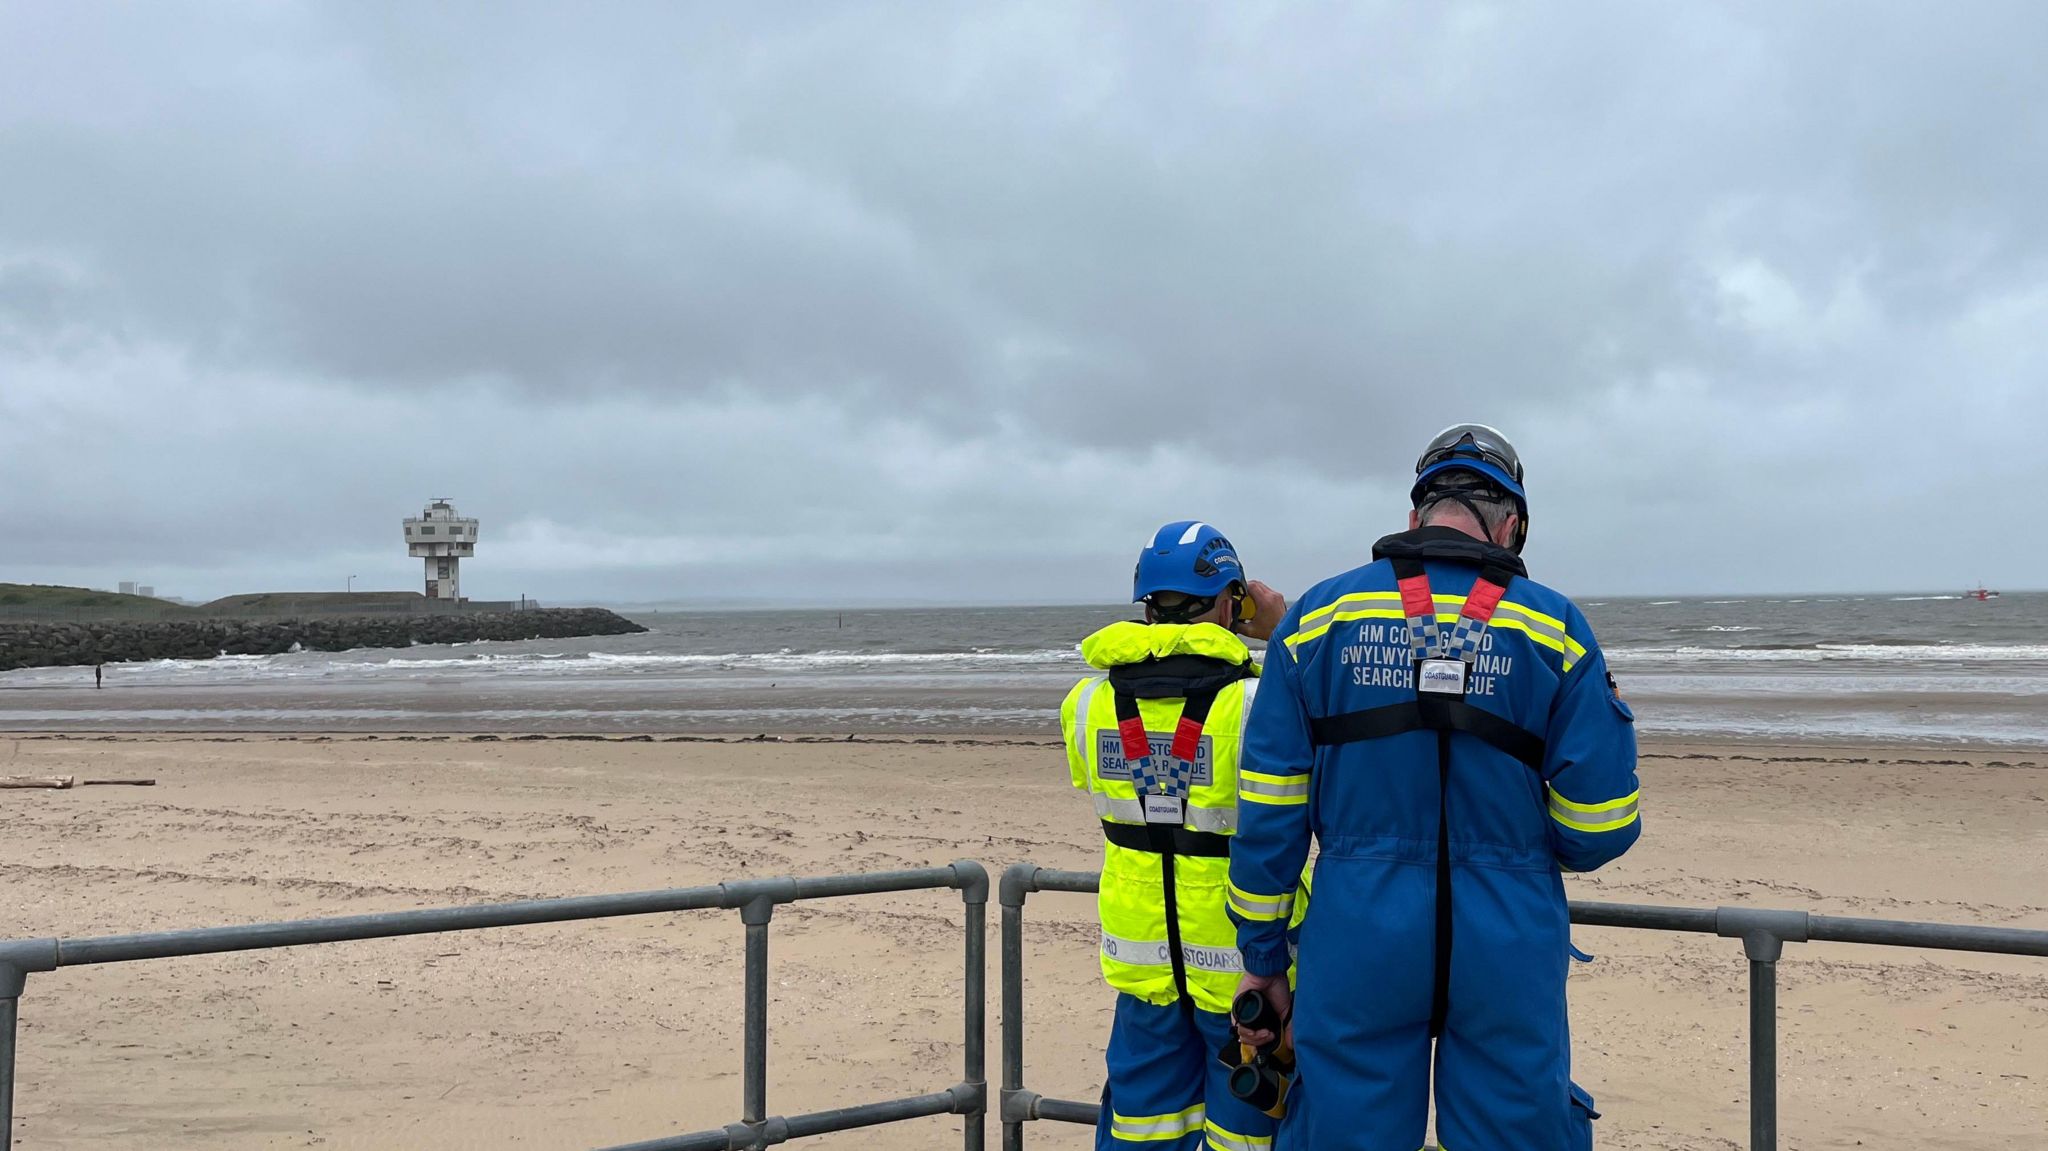 Search and rescue workers looking out to sea in search for missing teenager at Crosby Beach